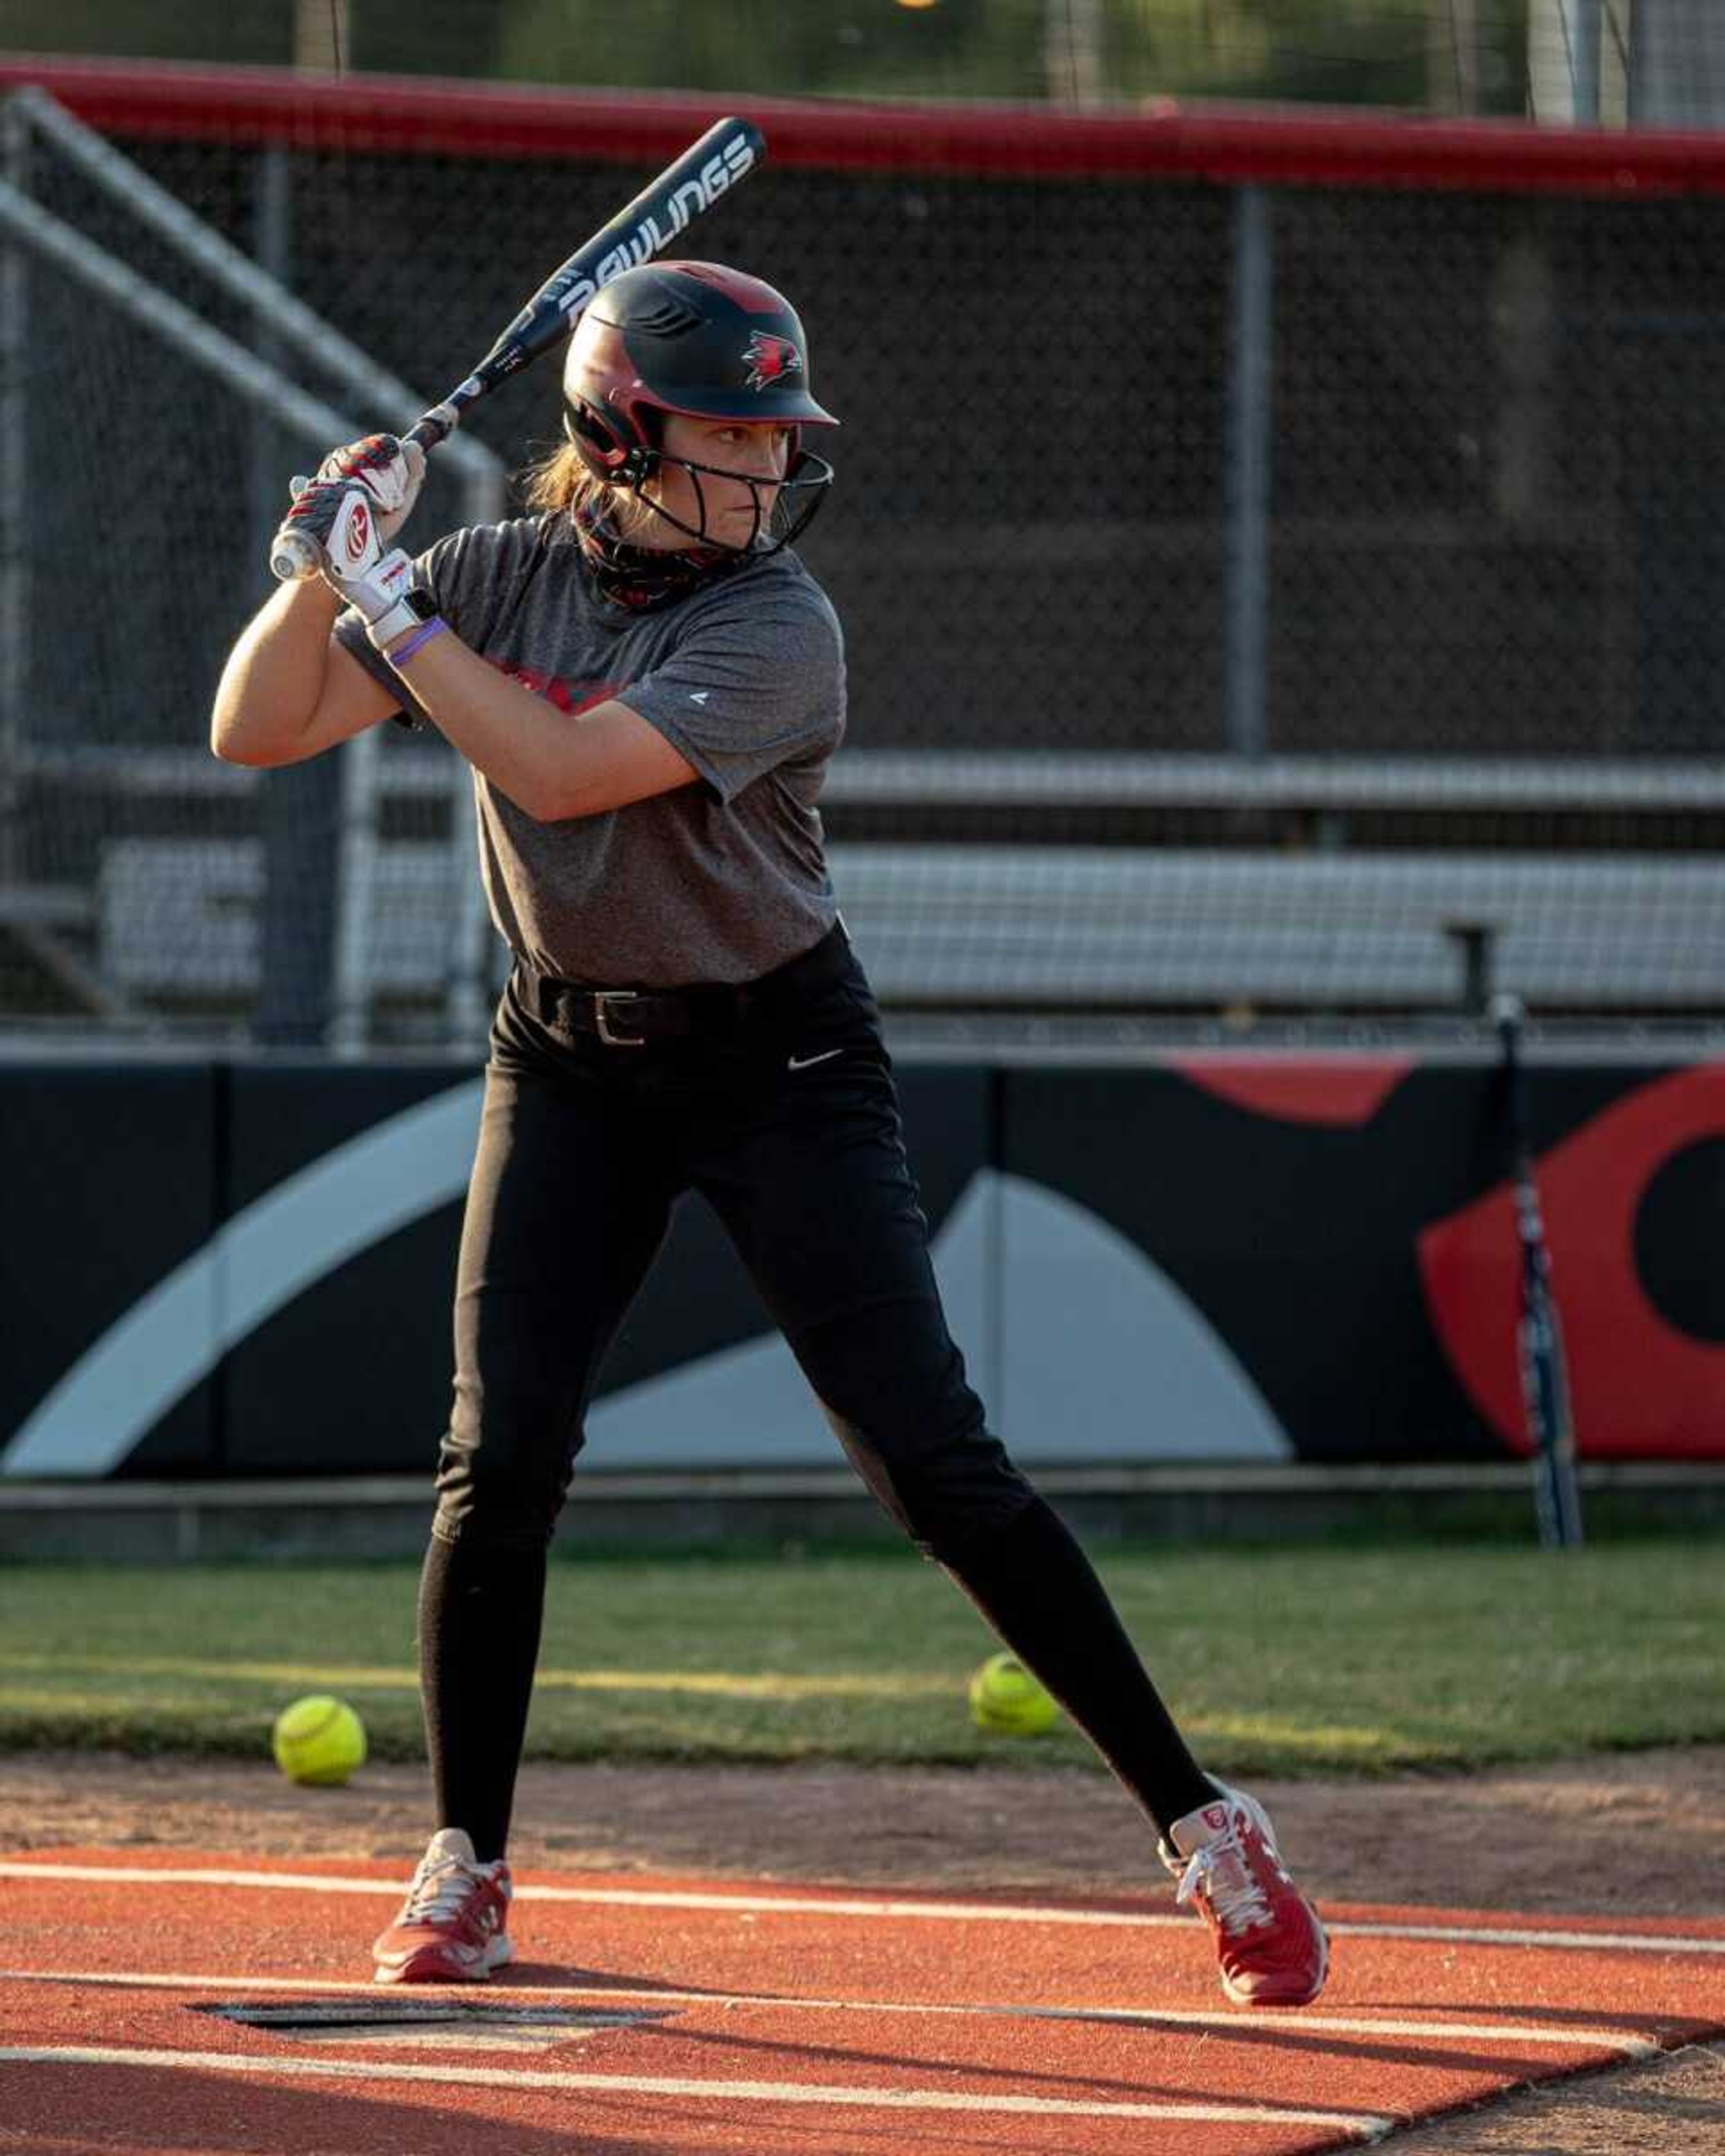 Junior Kaylee Anderson during batting practice on Sept. 21 at the softball complex in Cape Girardeau, Missouri.